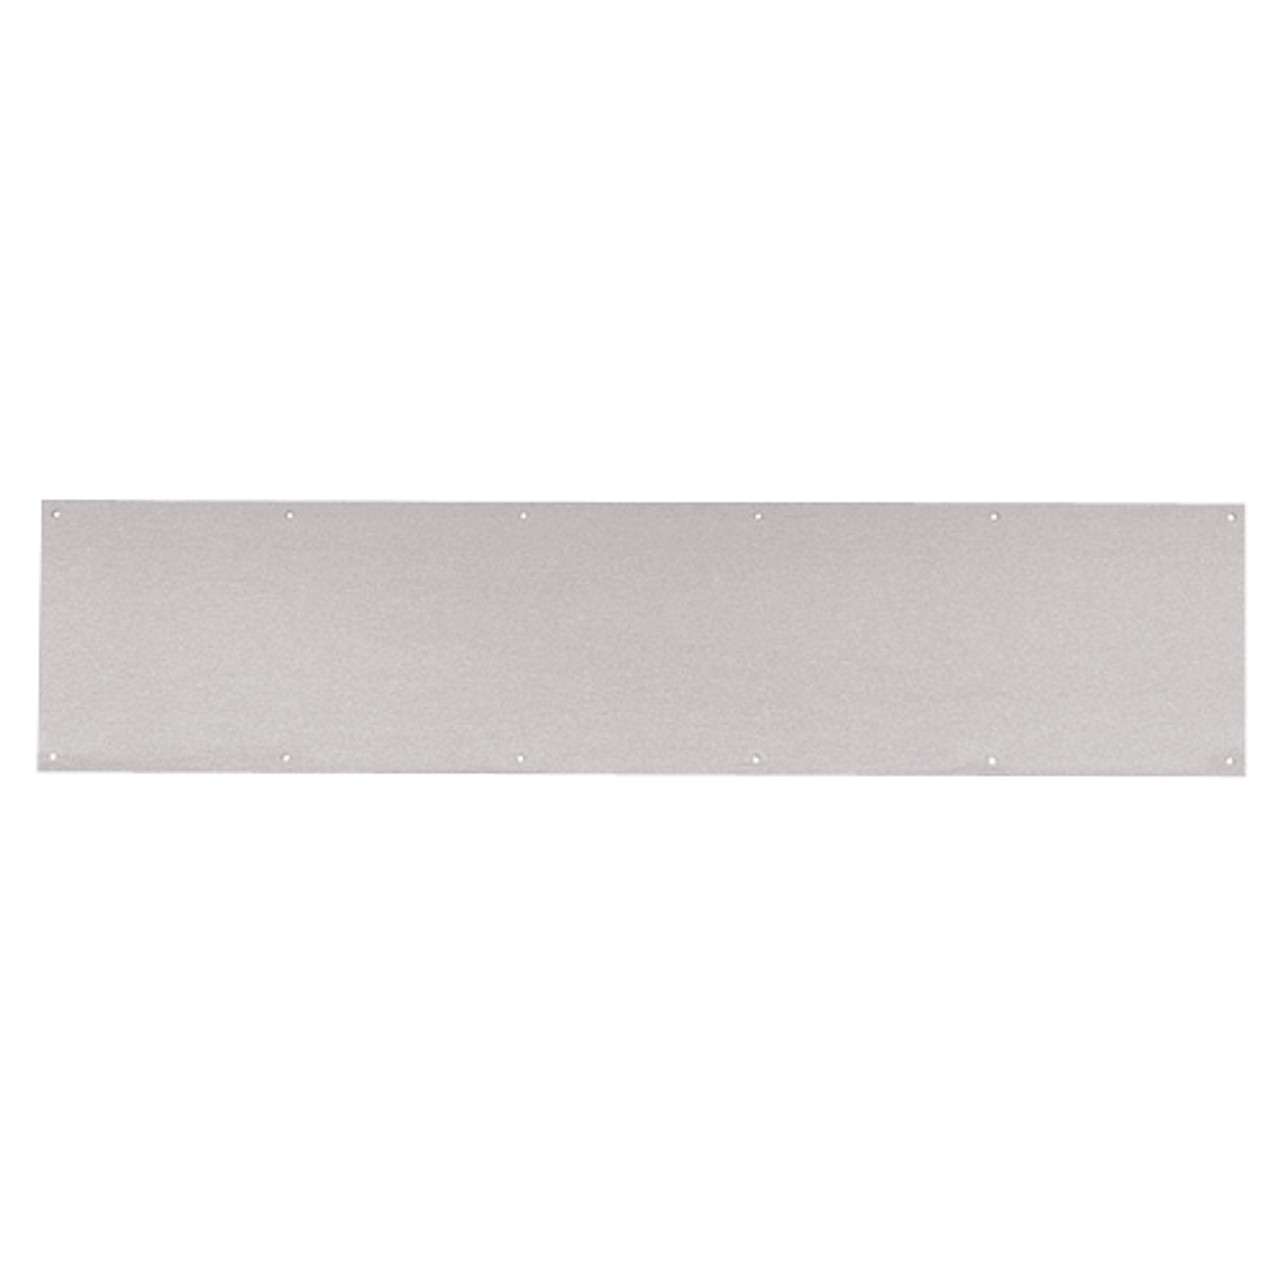 8400-US32D-35x33-B-CS Ives 8400 Series Protection Plate in Satin Stainless Steel